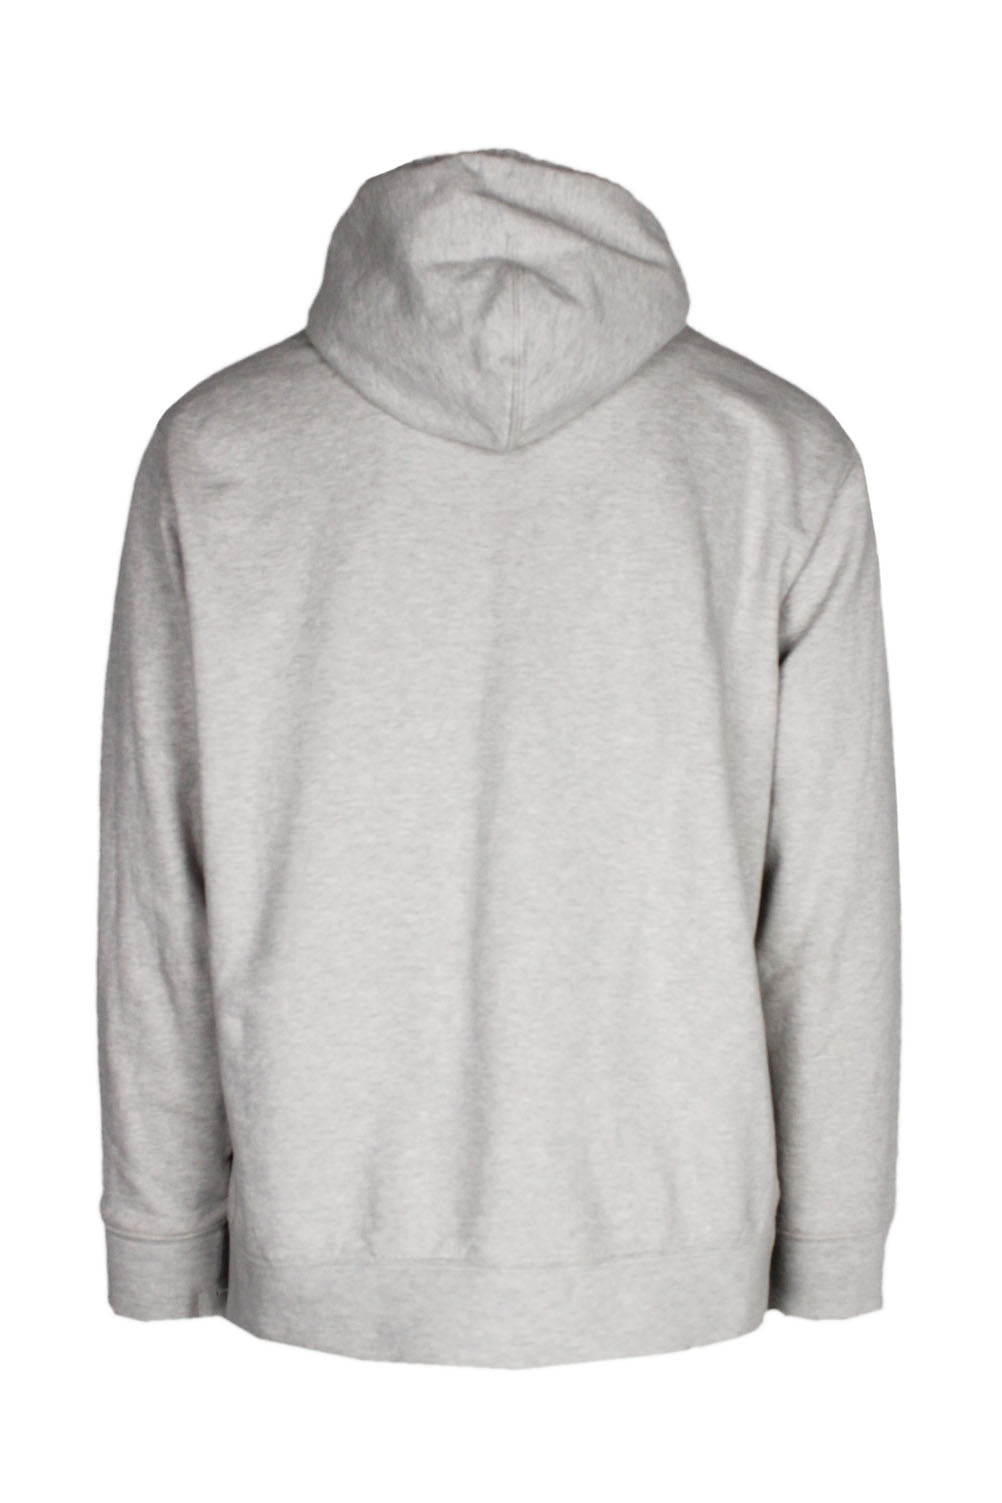 rear view with ribbed cuffs/hem of sweatshirt.